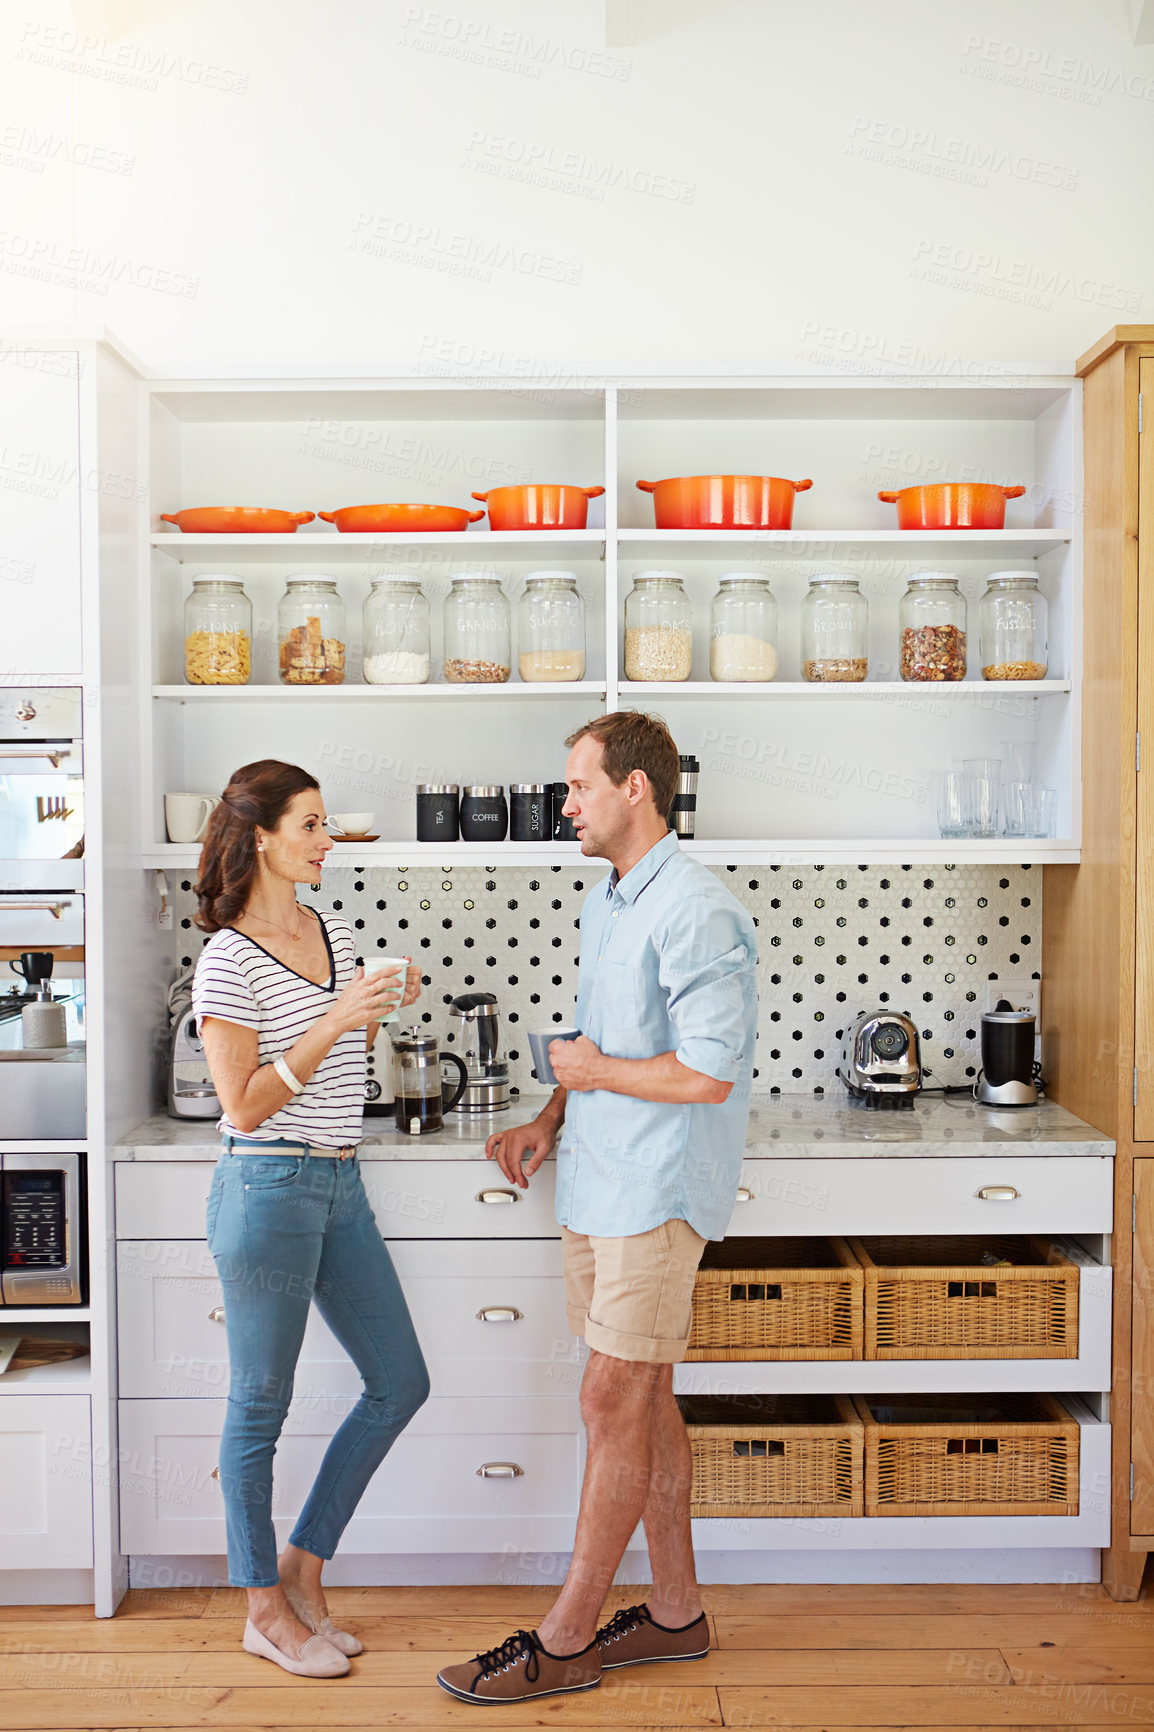 Buy stock photo Shot of a happy married couple enjoying a cup of coffee together in their kitchen at home